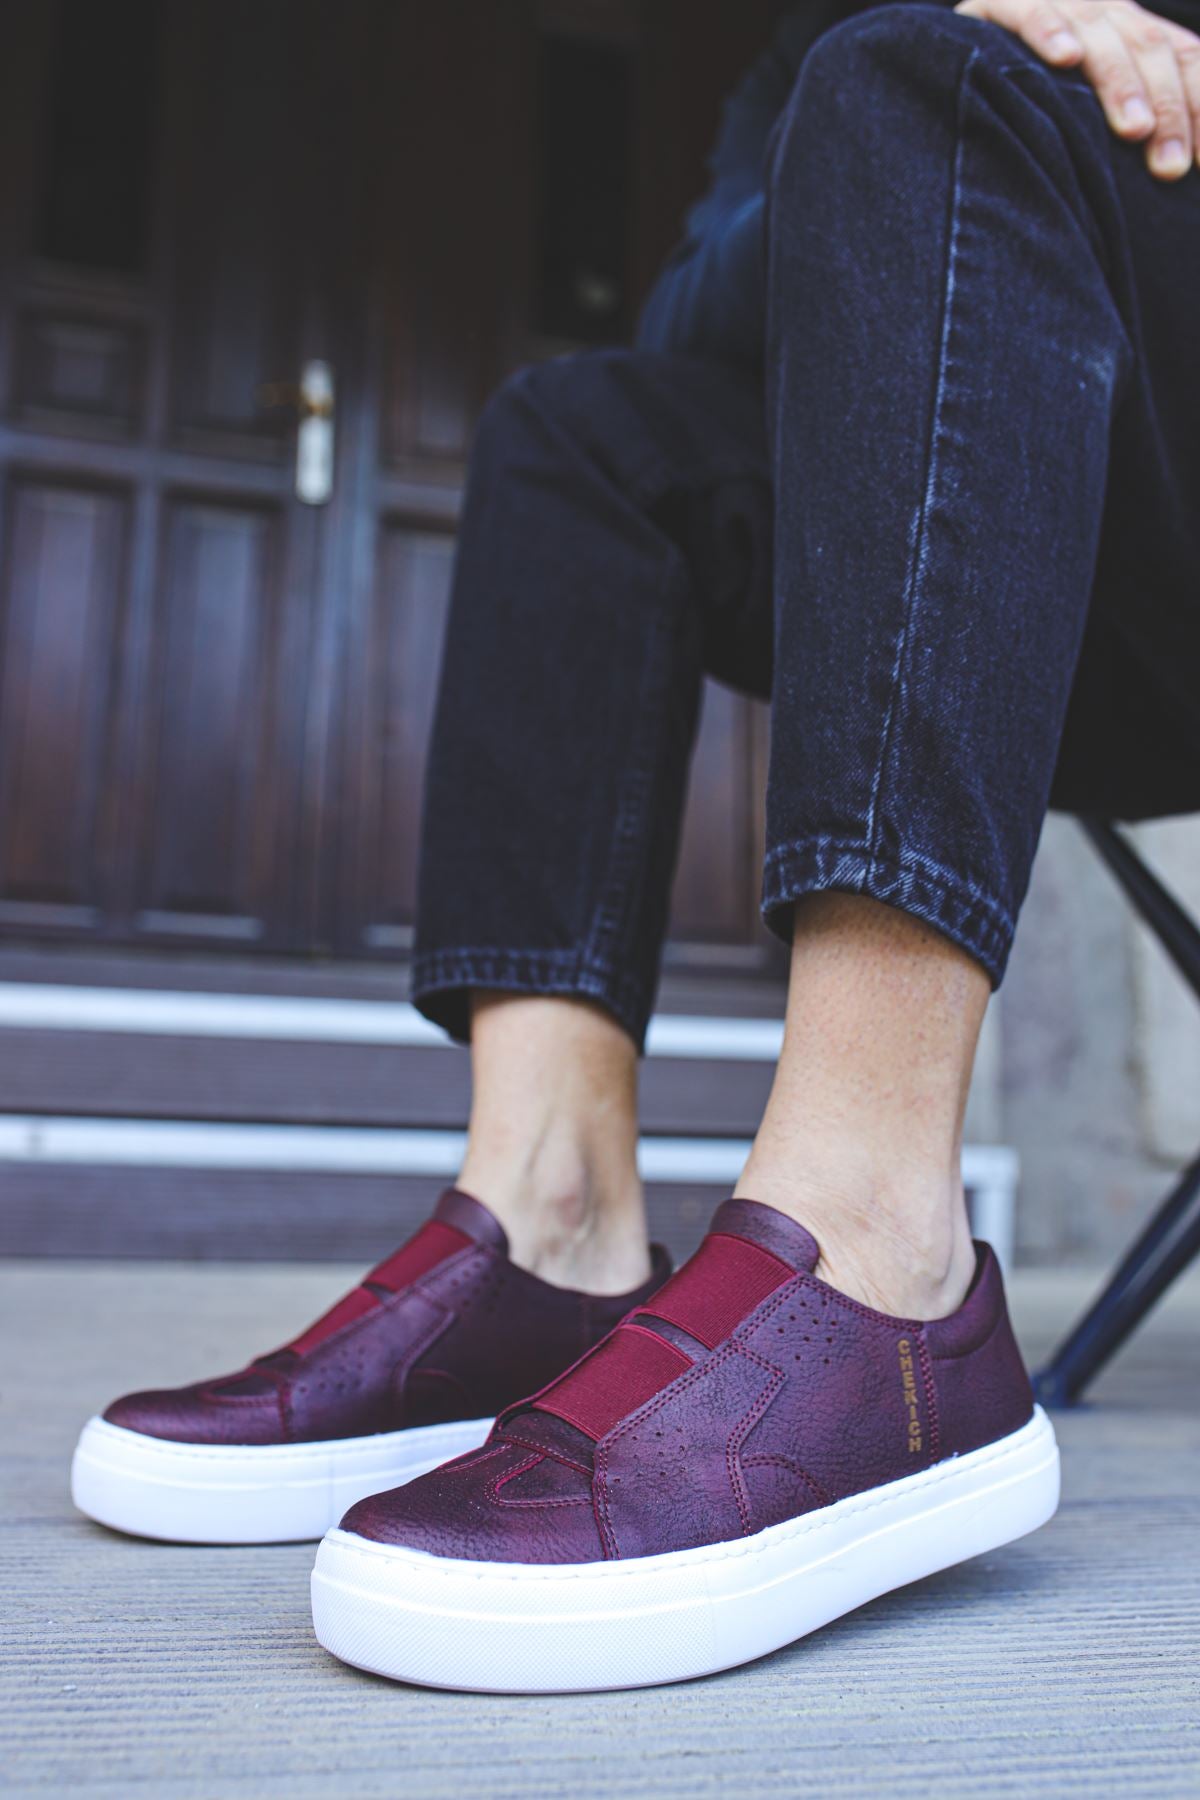 CH033 Men's Burgundy-White Sole Banded Casual Sneaker Sports Shoes - STREETMODE ™